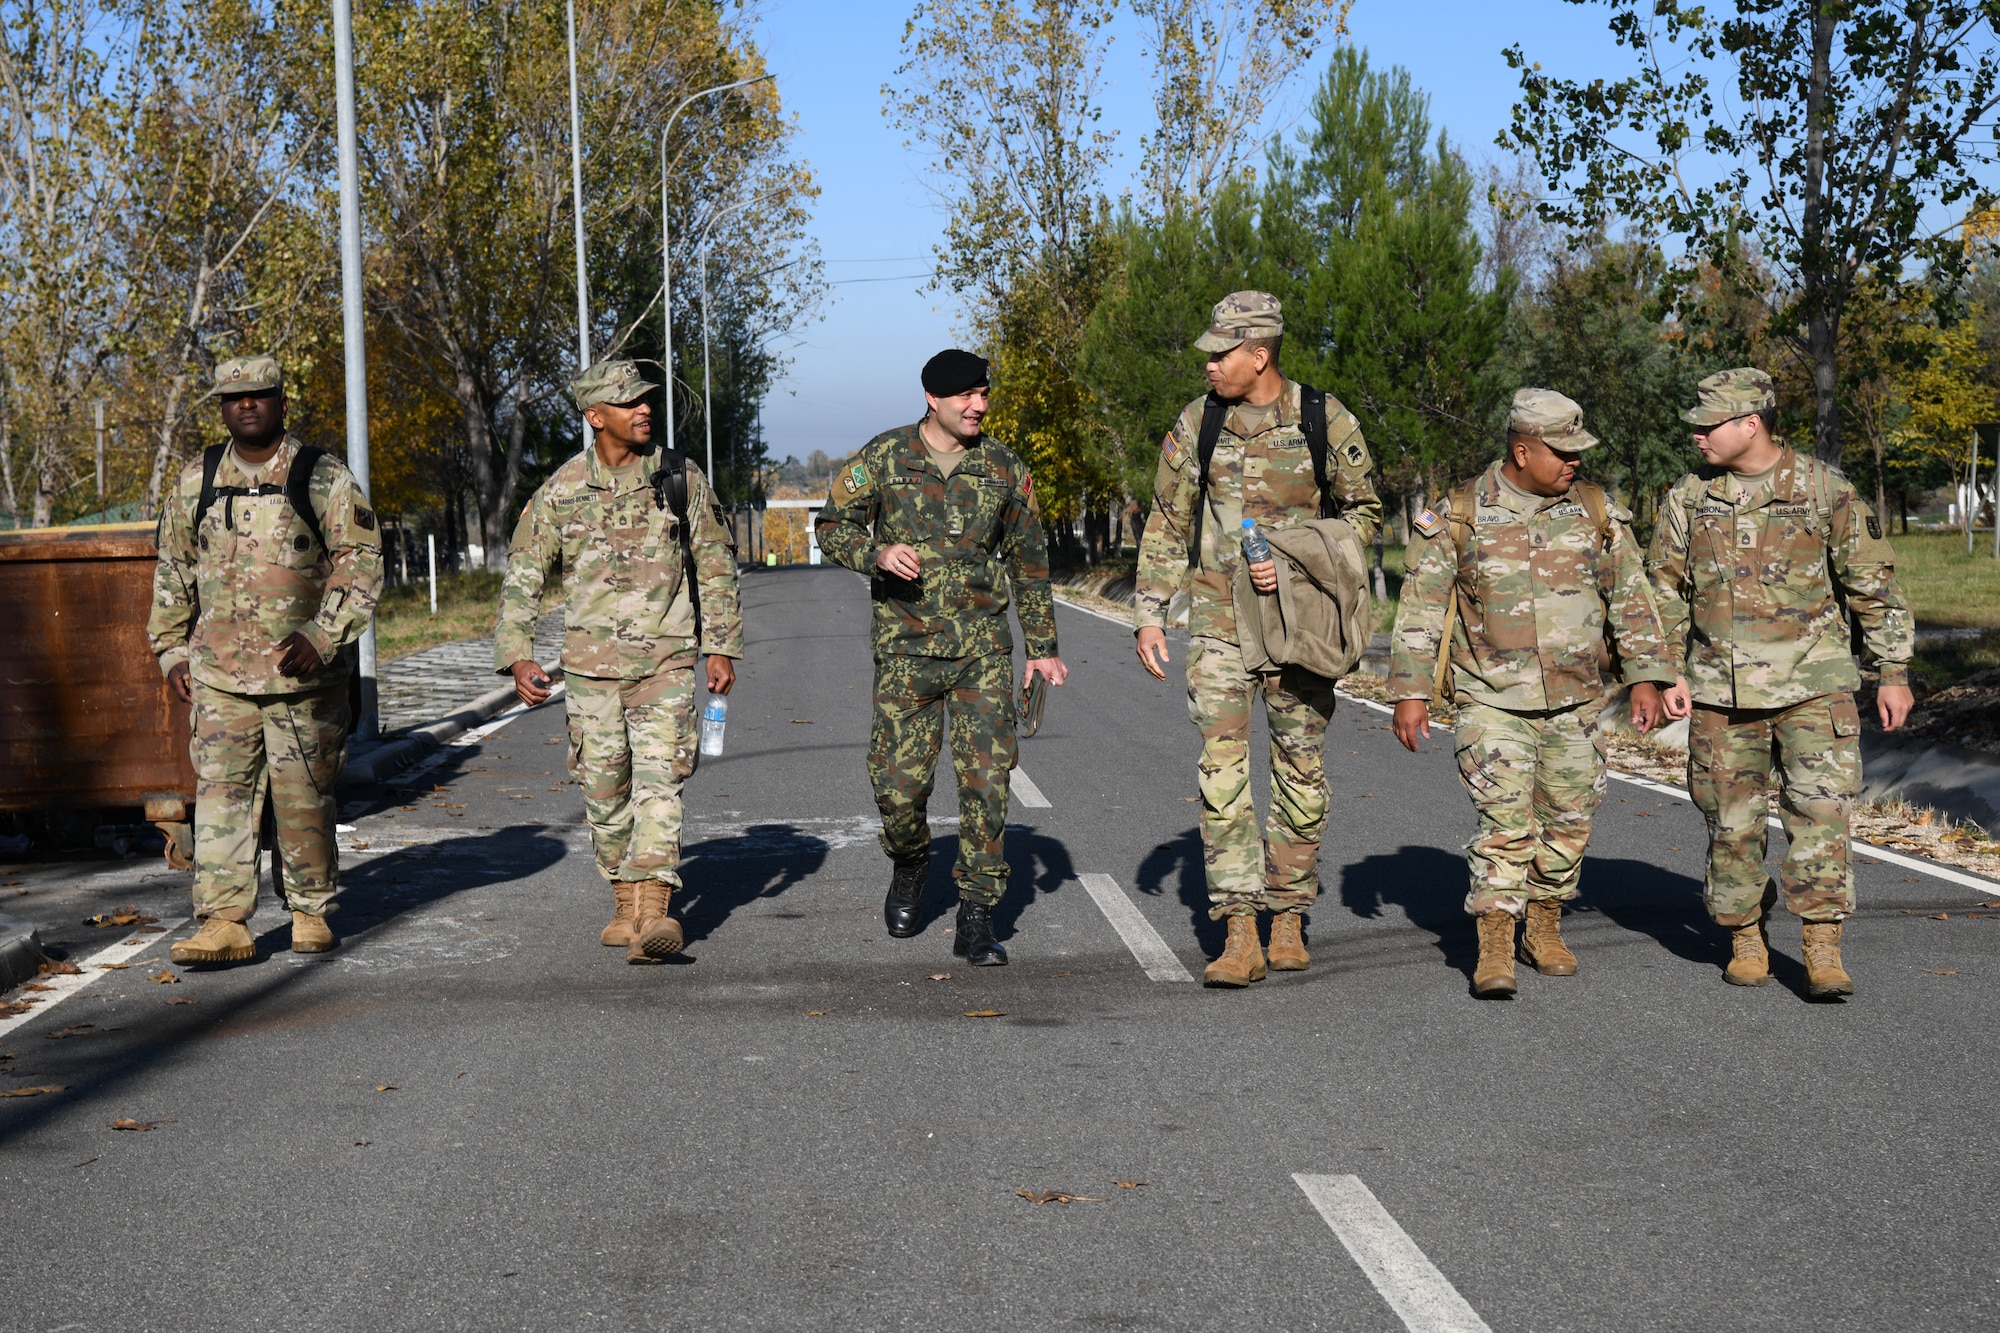 U.S. Army Soldiers with the 254th Regimental Training Institute, New Jersey Army National Guard, walking and talking with Albanian Armed Forces Capt. Mirsit Bimaj, deputy company commander at Land Forces Headquarters.